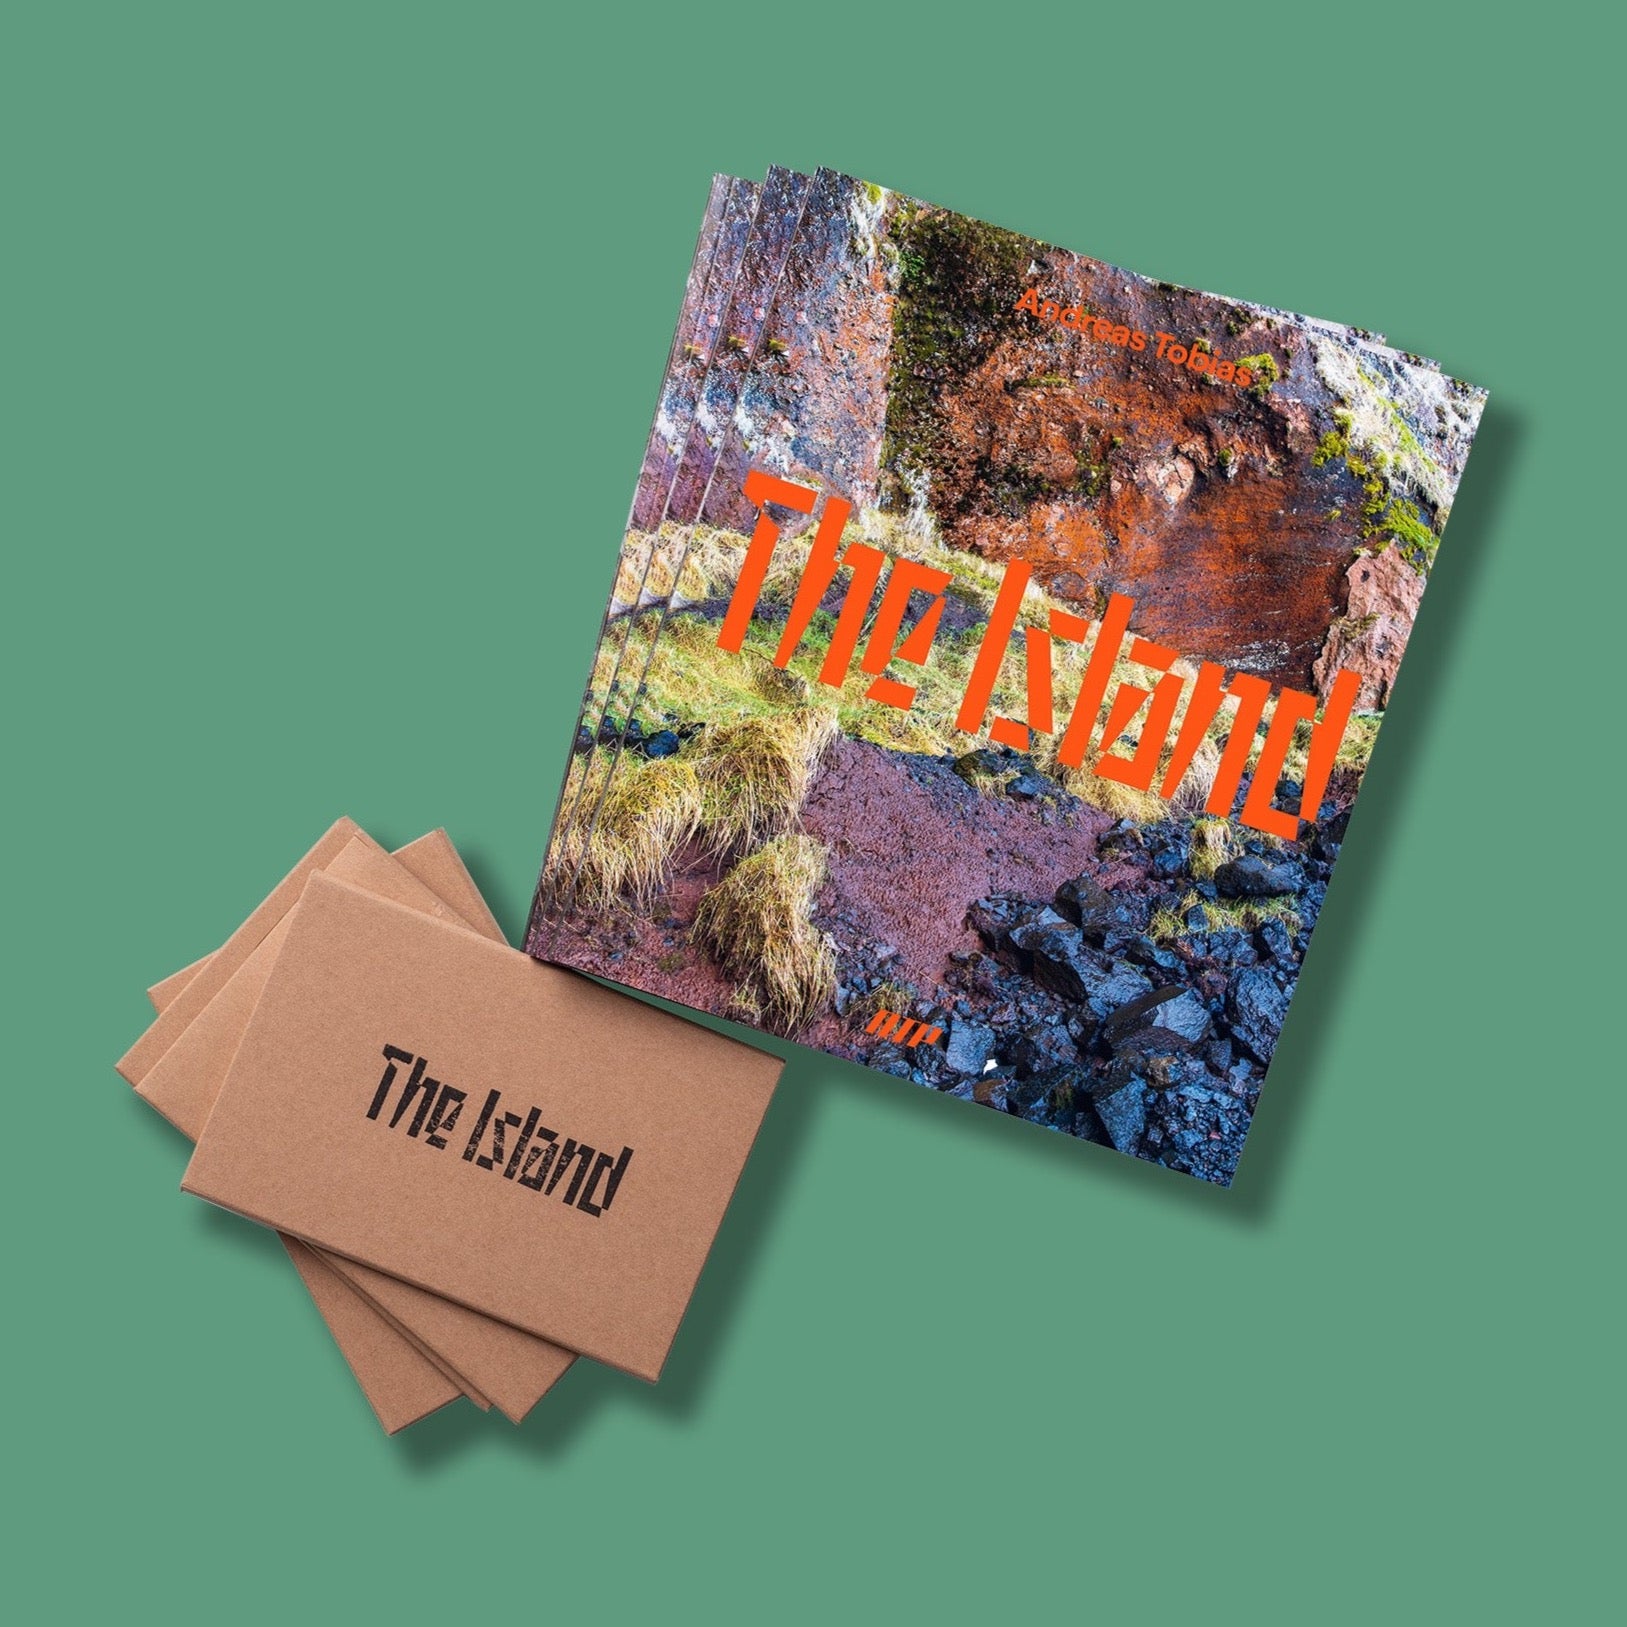 THE ISLAND – Book and postcards as a set